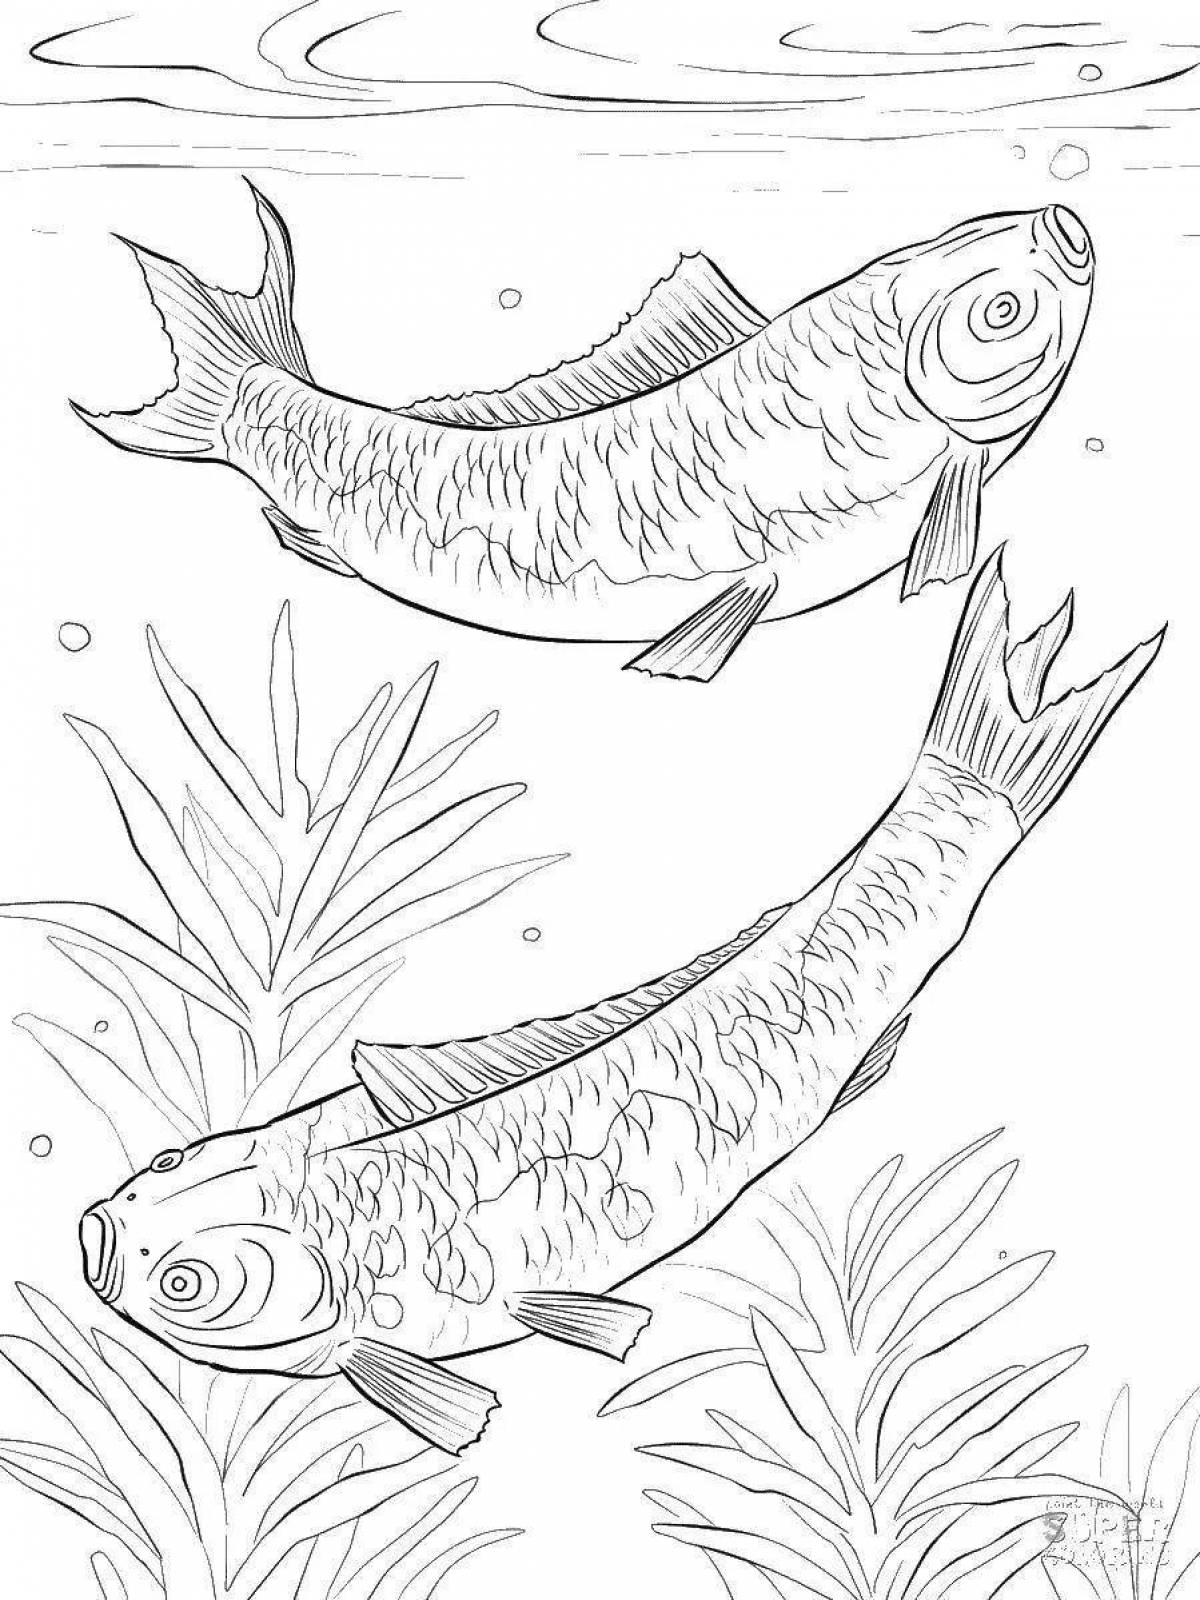 Radiant Baikal coloring page